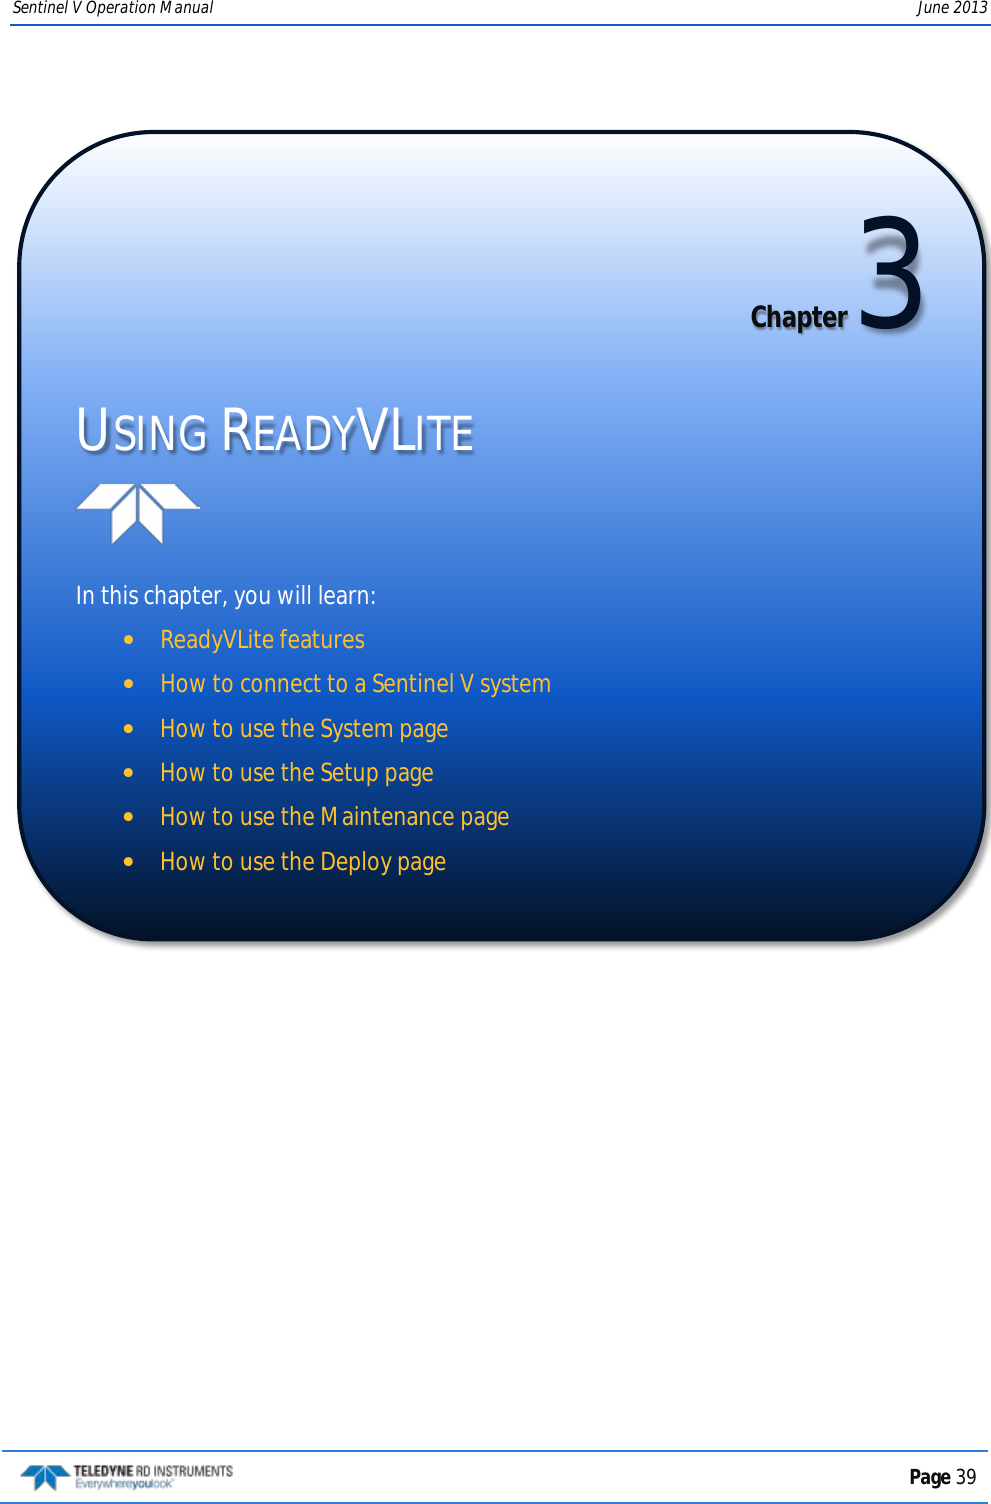 Sentinel V Operation Manual June 2013   Chapter 3 USING READYVLITE   In this chapter, you will learn: •ReadyVLite features •How to connect to a Sentinel V system •How to use the System page •How to use the Setup page •How to use the Maintenance page •How to use the Deploy page   Page 39  